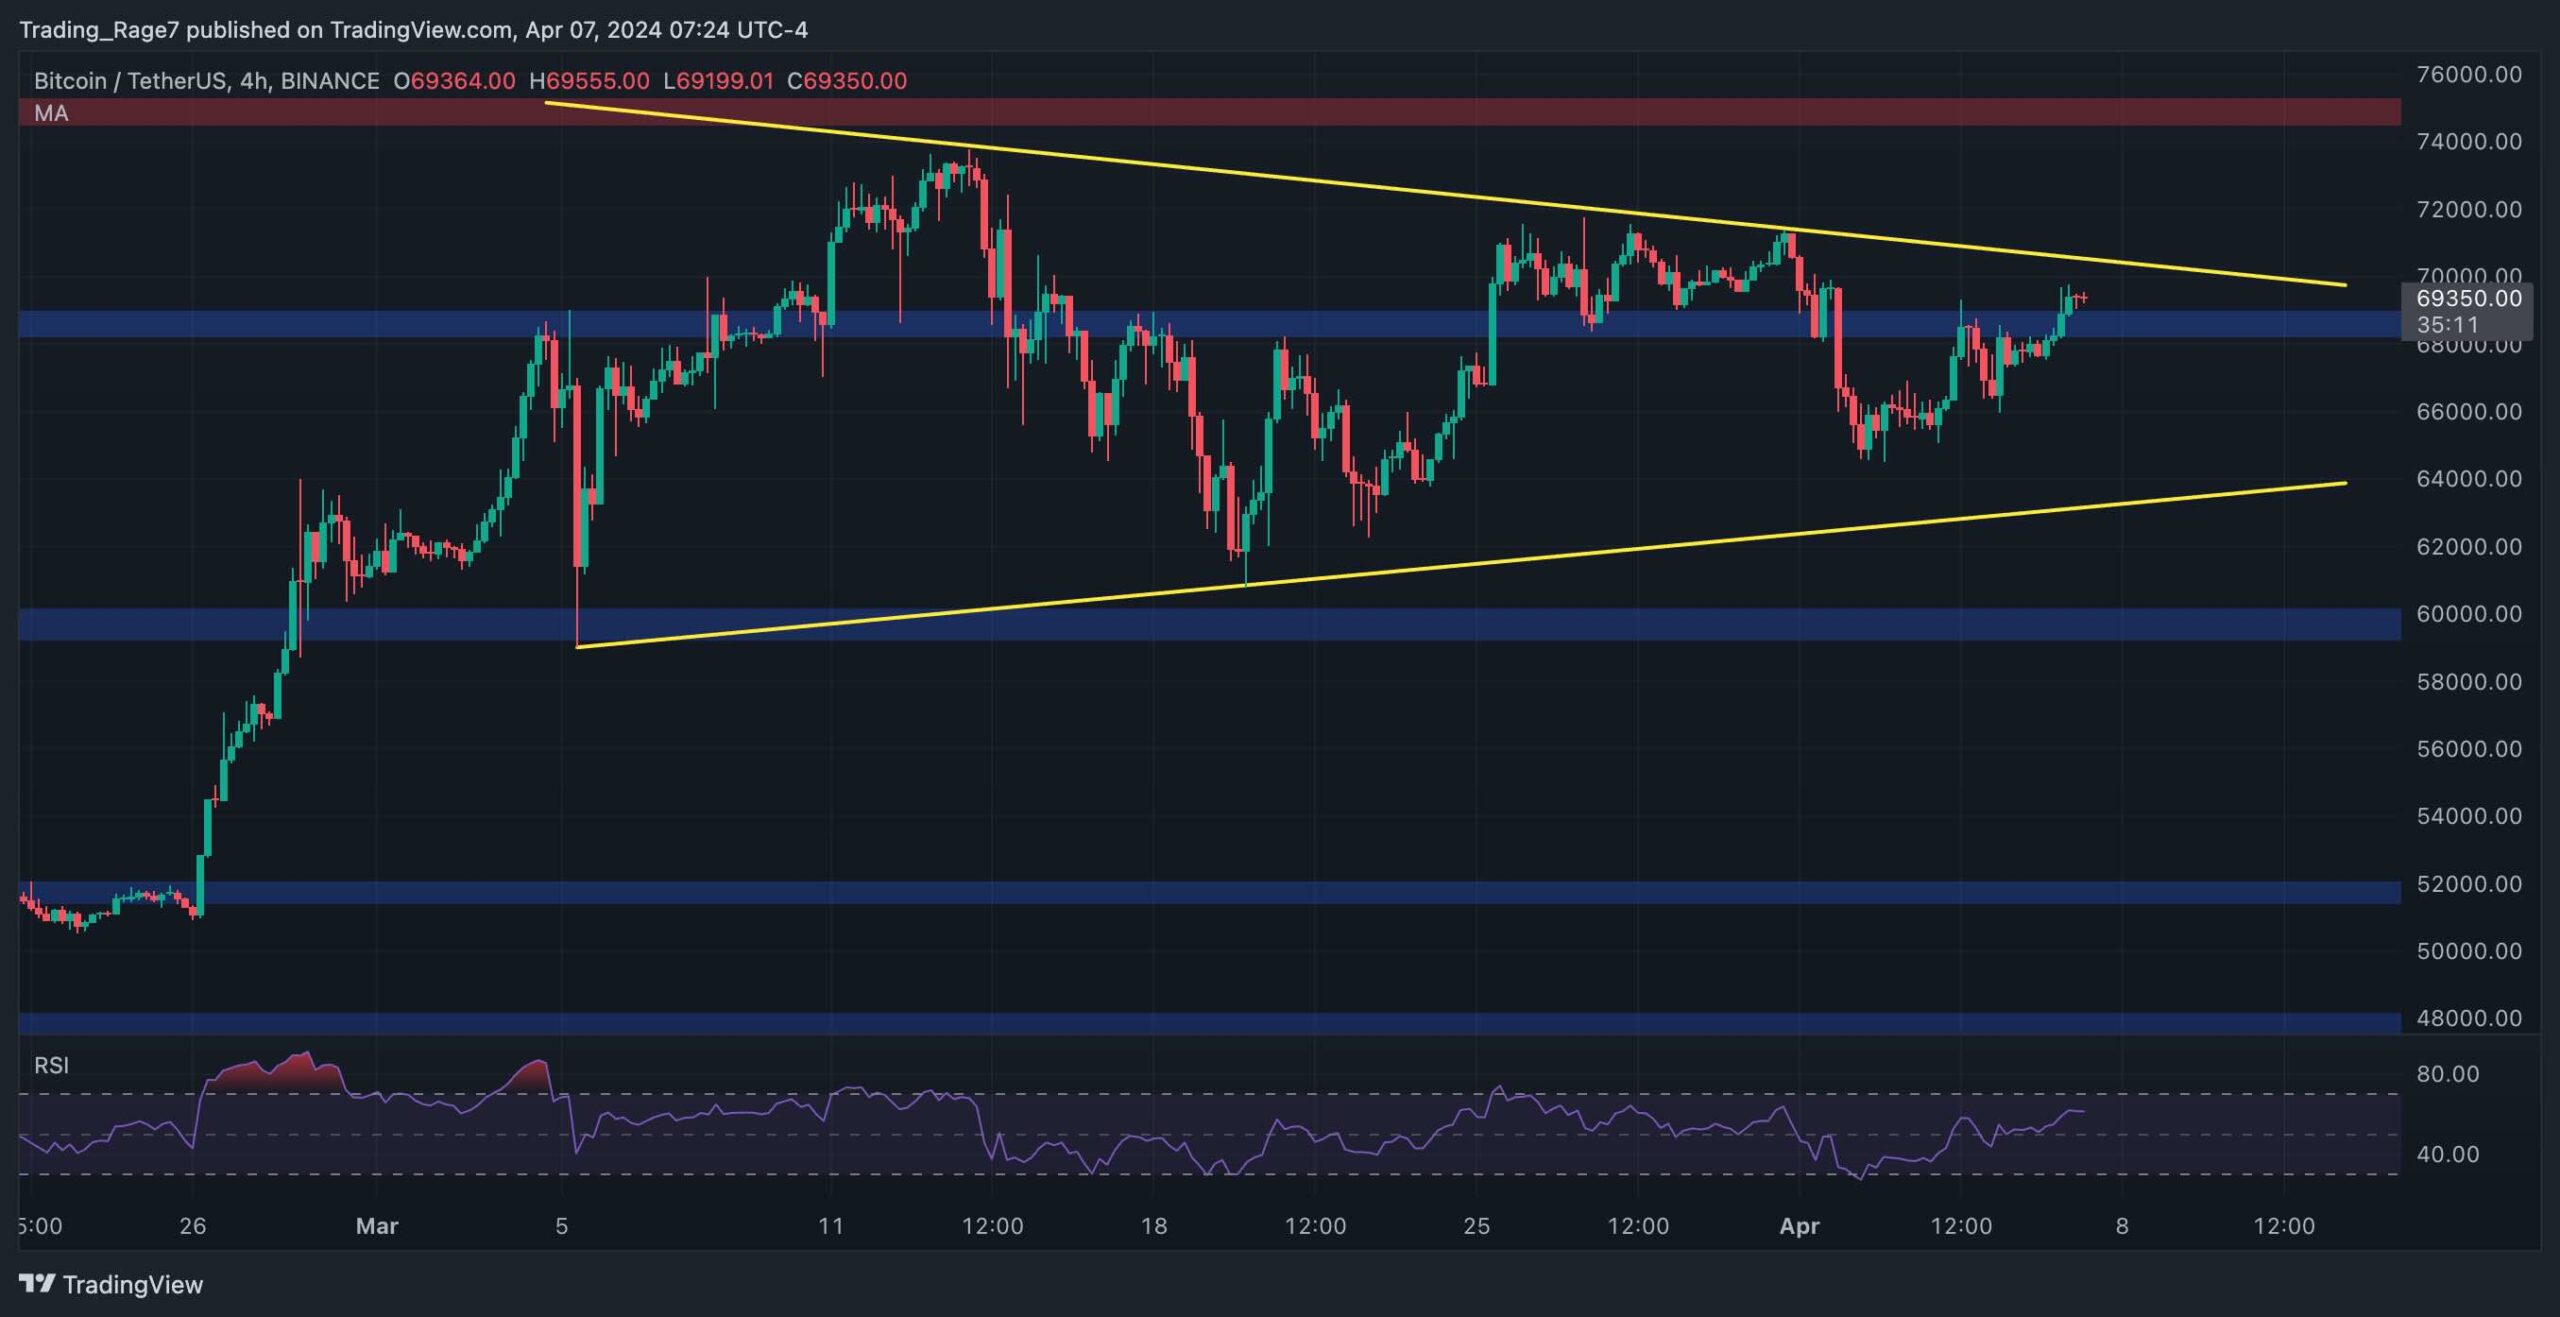 Will-bitcoin-chart-a-new-all-time-high-before-the-upcoming-halving?-(btc-price-analysis)